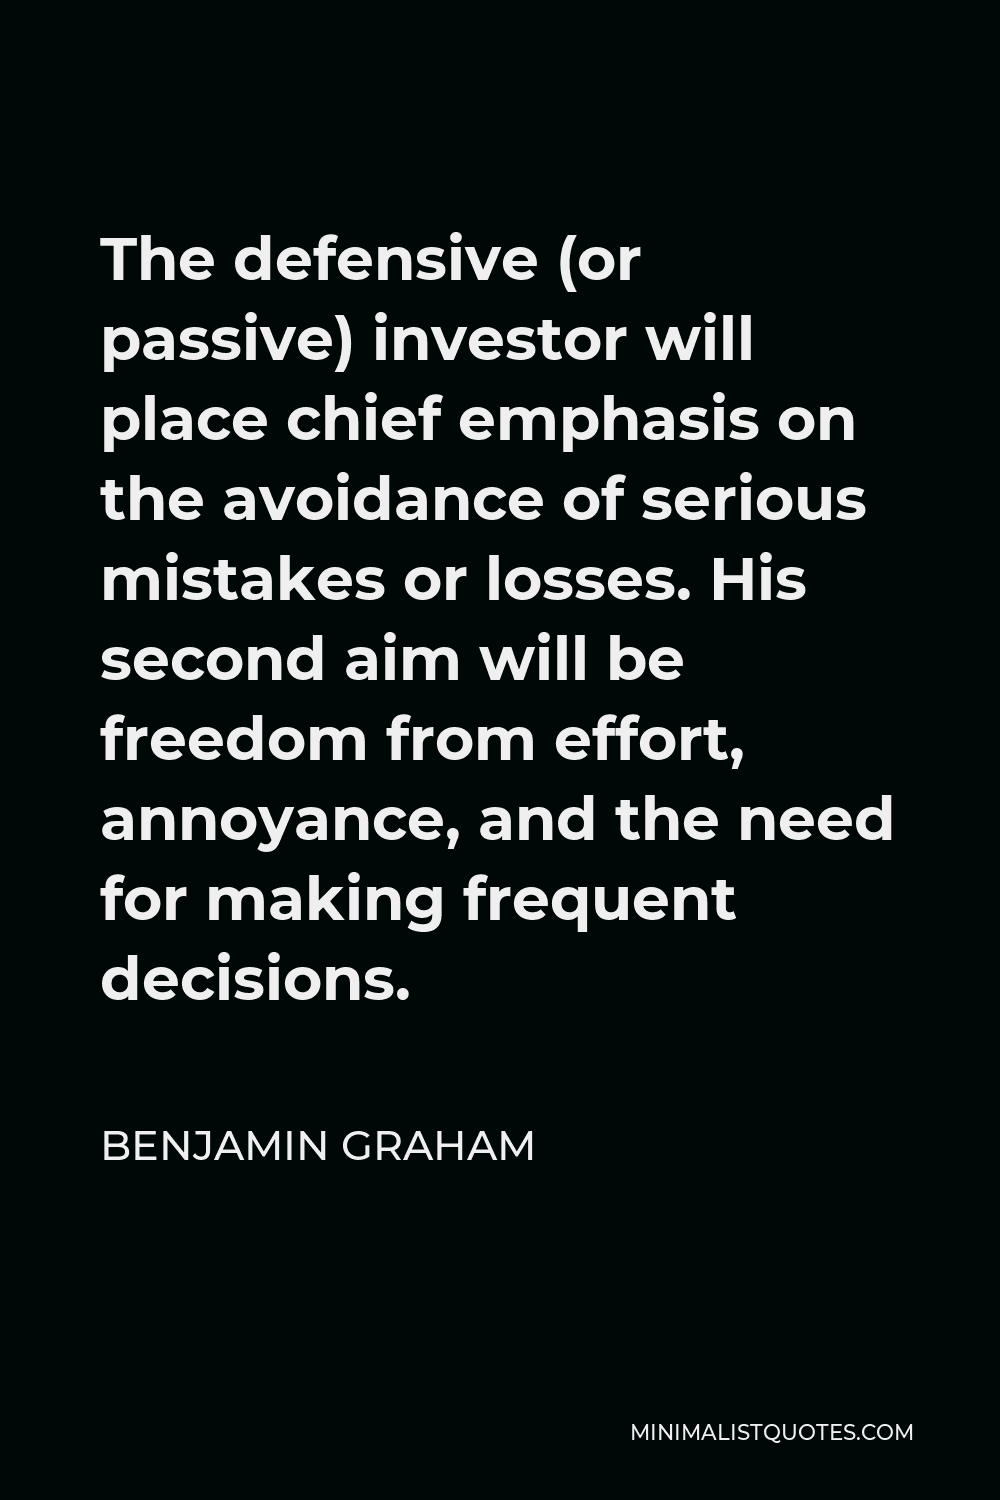 Benjamin Graham Quote - The defensive (or passive) investor will place chief emphasis on the avoidance of serious mistakes or losses. His second aim will be freedom from effort, annoyance, and the need for making frequent decisions.